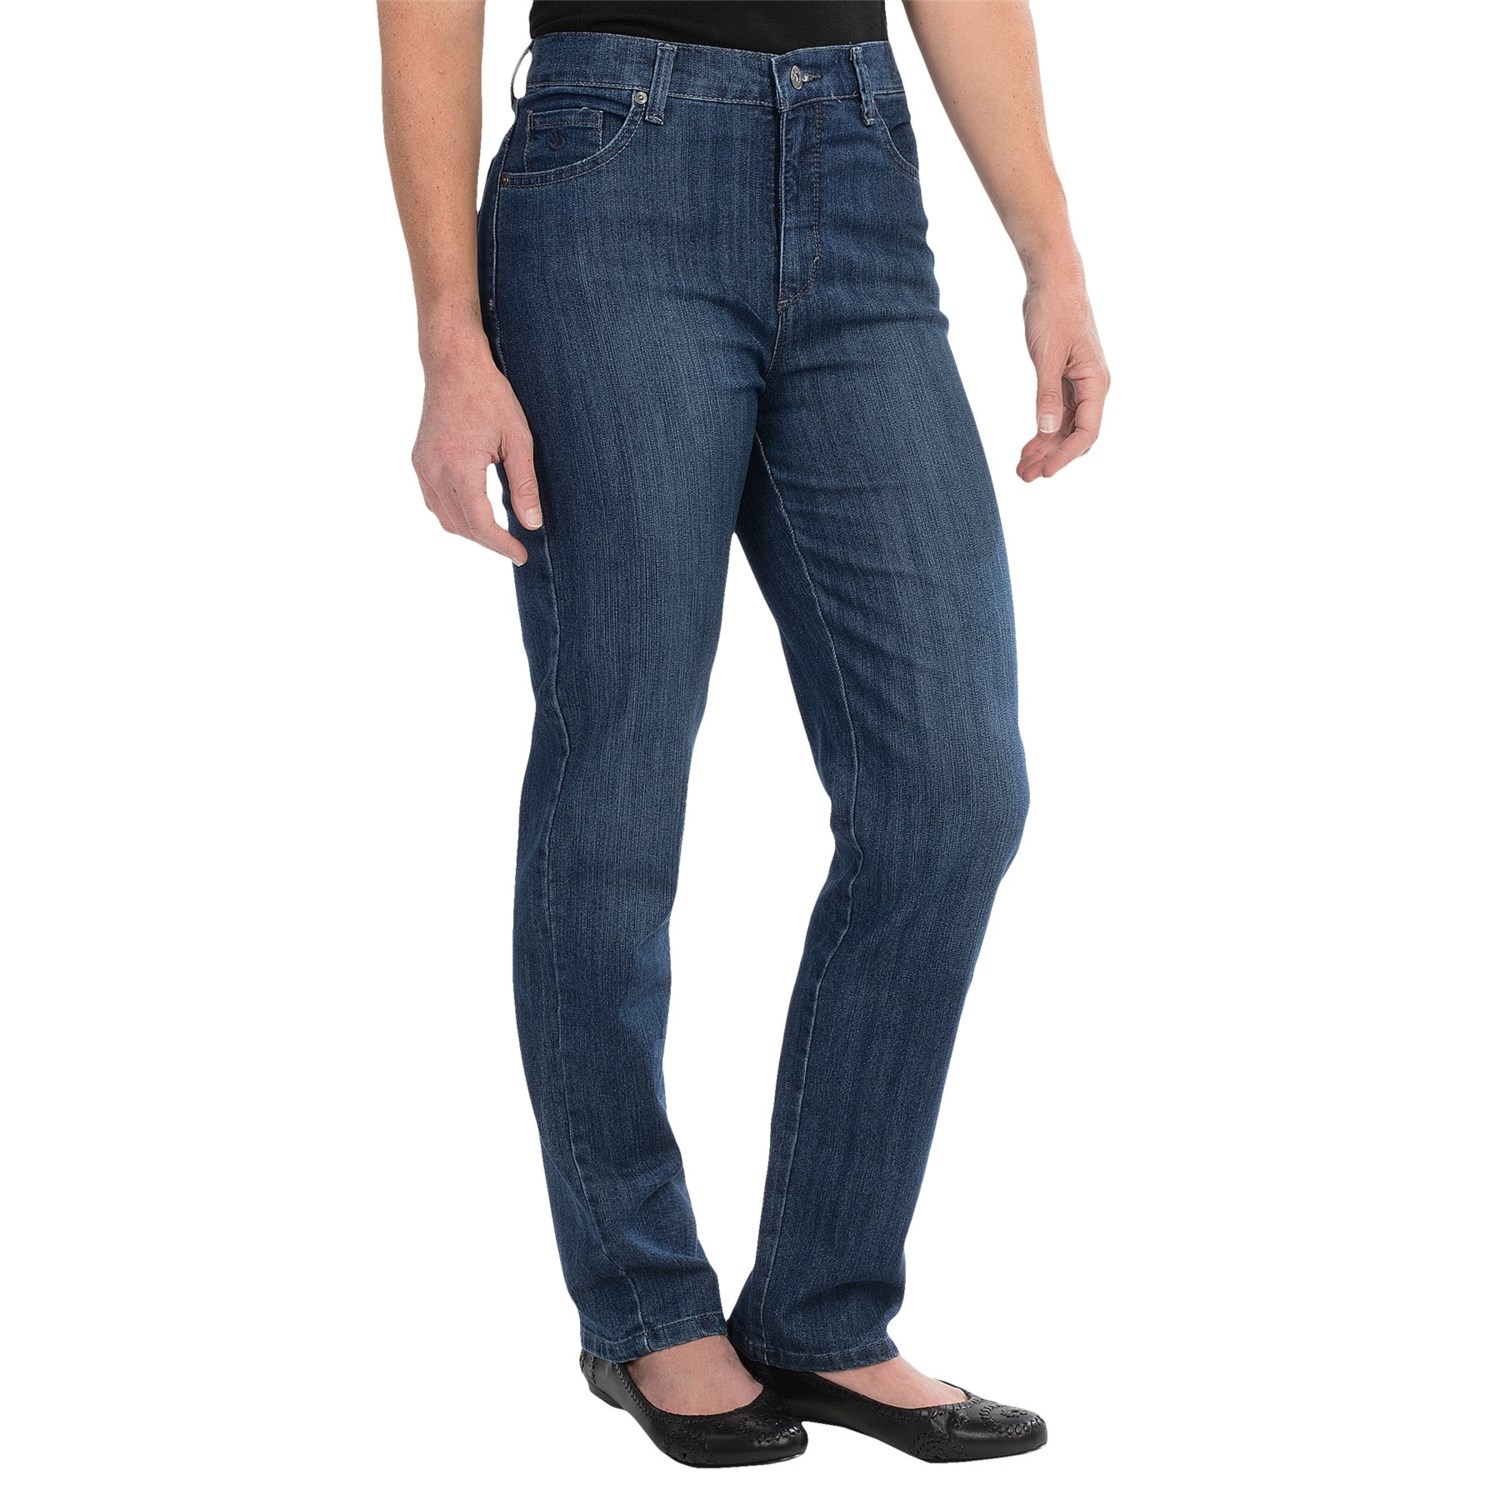 Tapered-Leg Jeans (For Women) 7772J - Save 88%